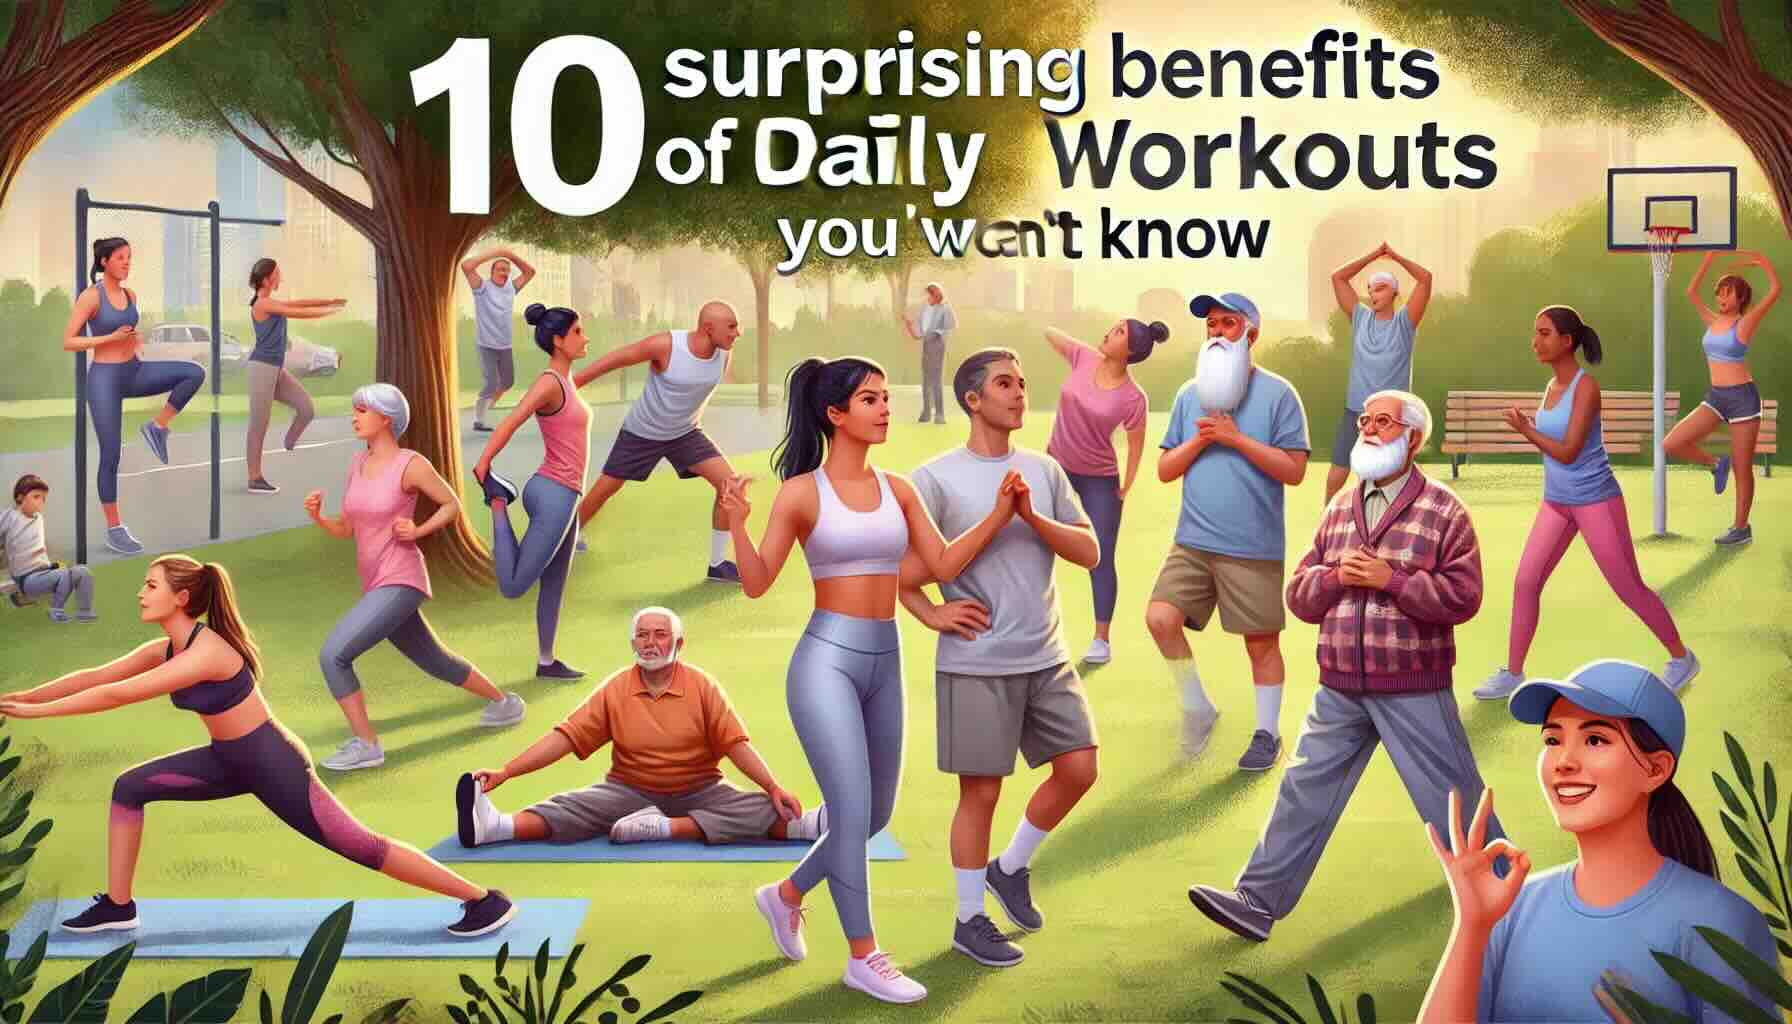 10 Surprising Benefits of Daily Workouts You Didn't Know